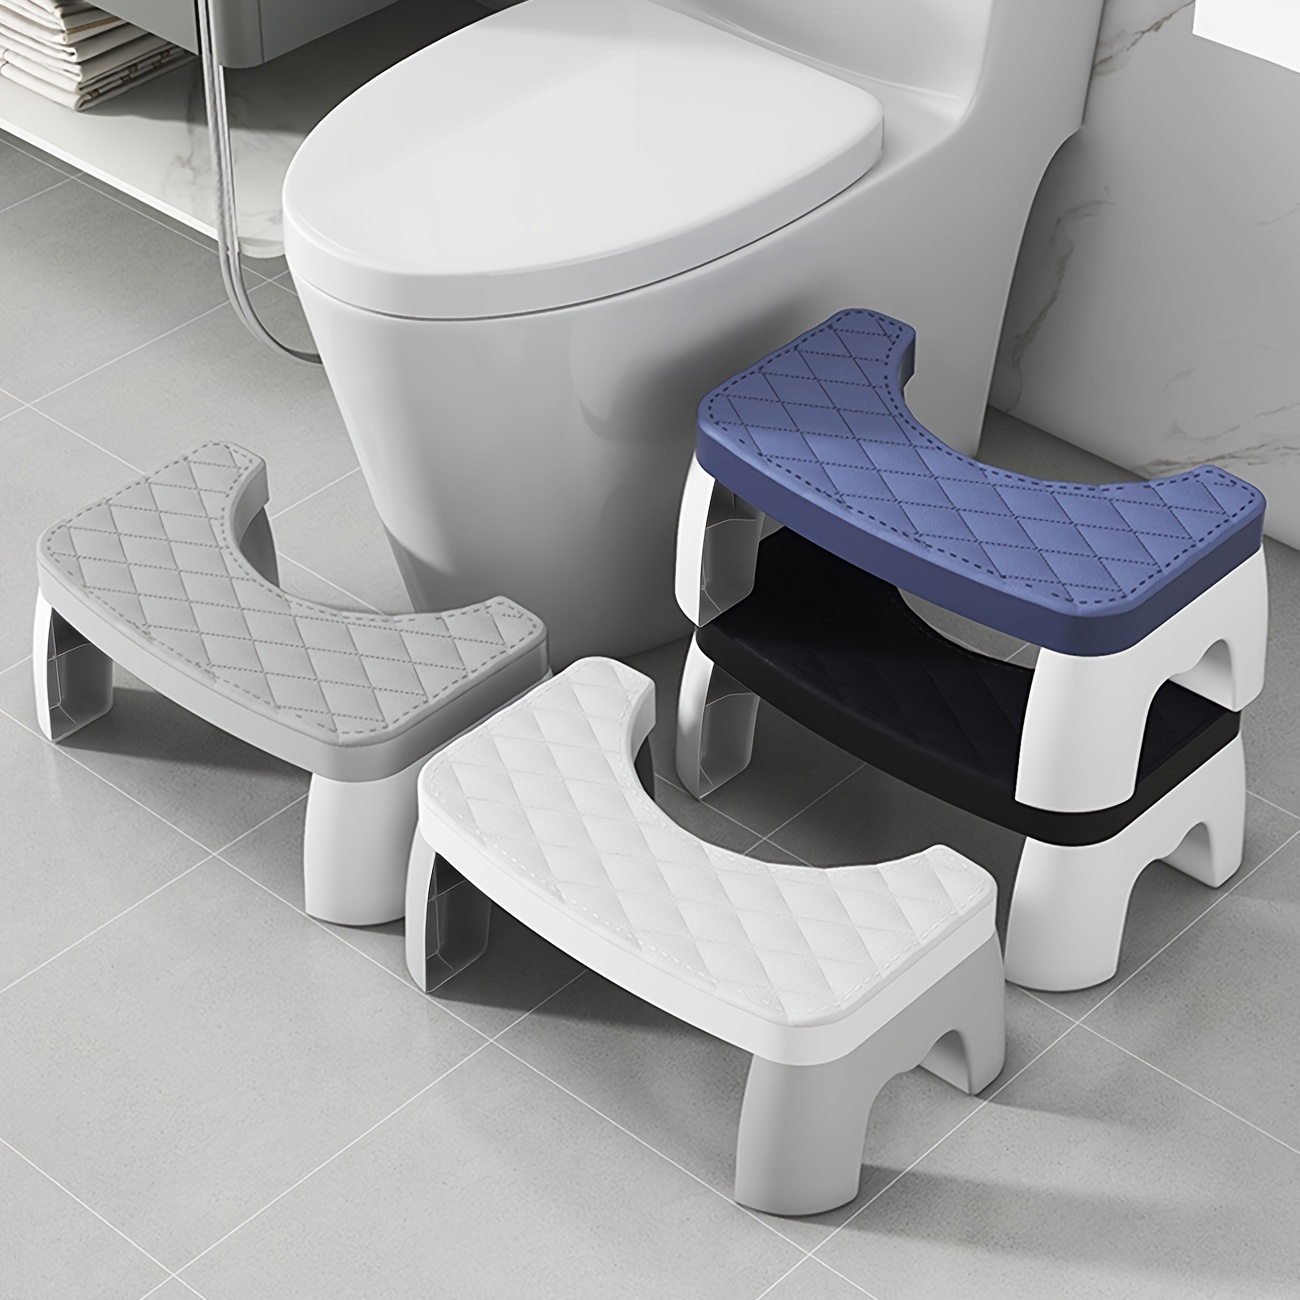 Foldable Potty Chair Household Elderly and Pregnant Woman Washable Commode  Chair Portable Non-slip Stainless Steel Potty Stool Color: A